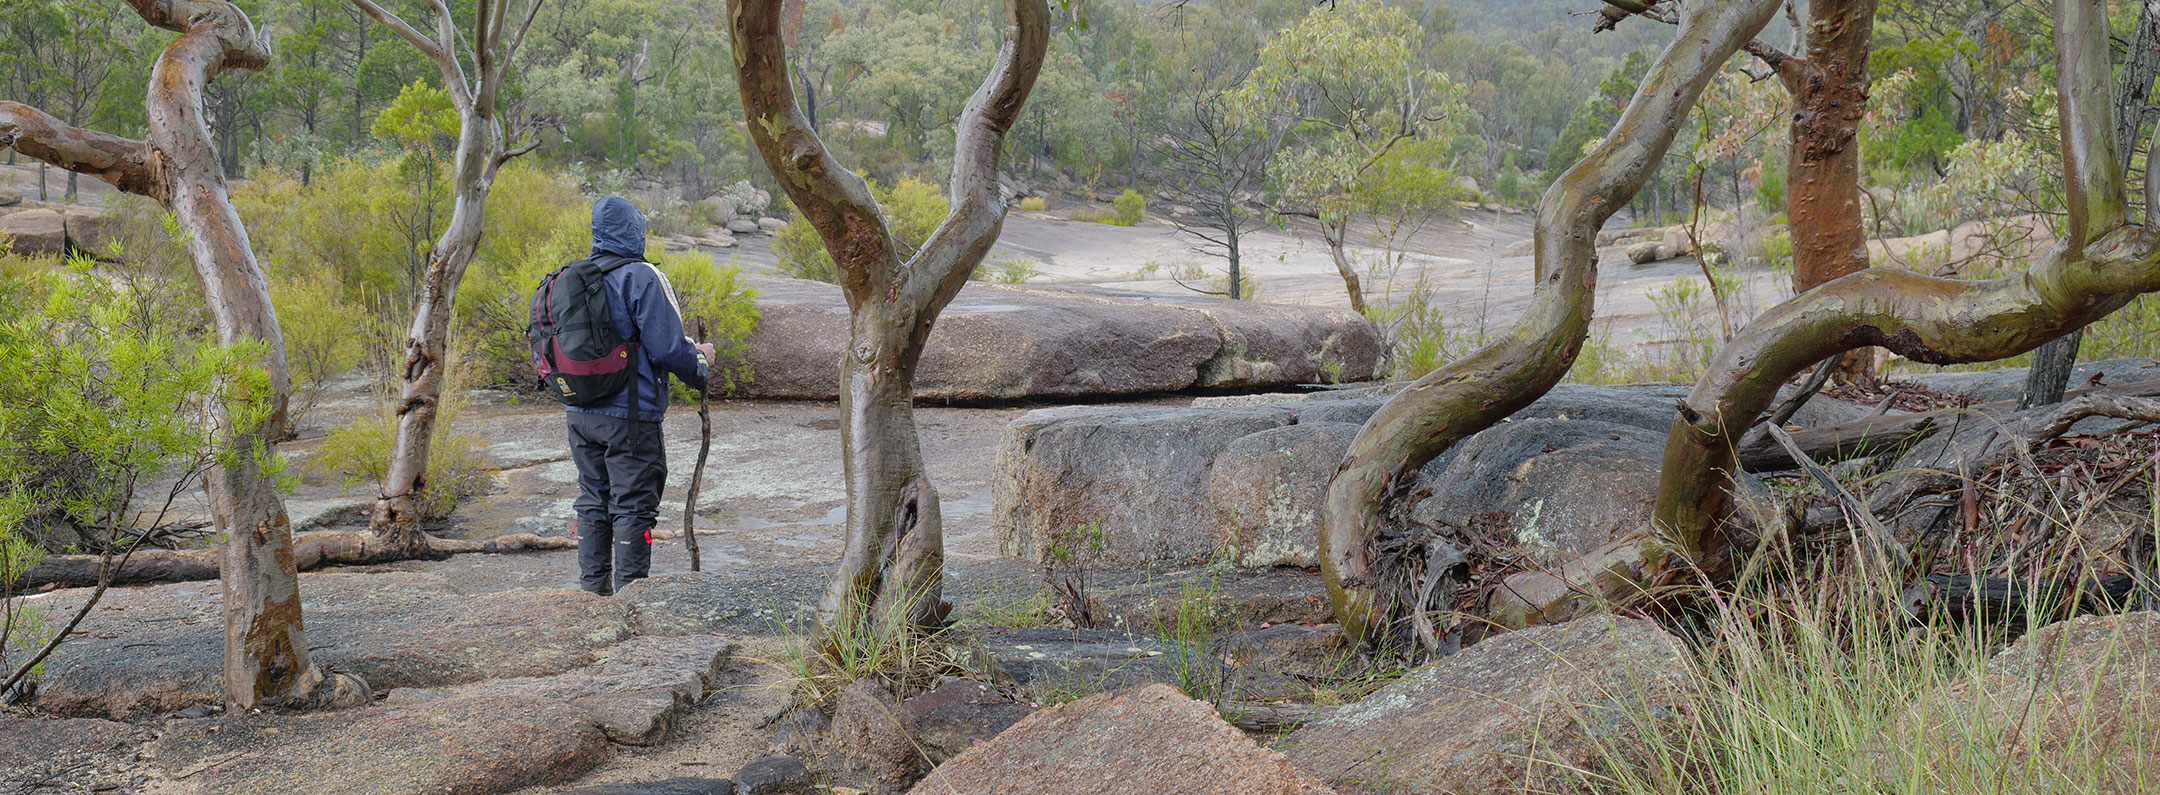 Looking out over the classic Australian landscape of Girraween National Park